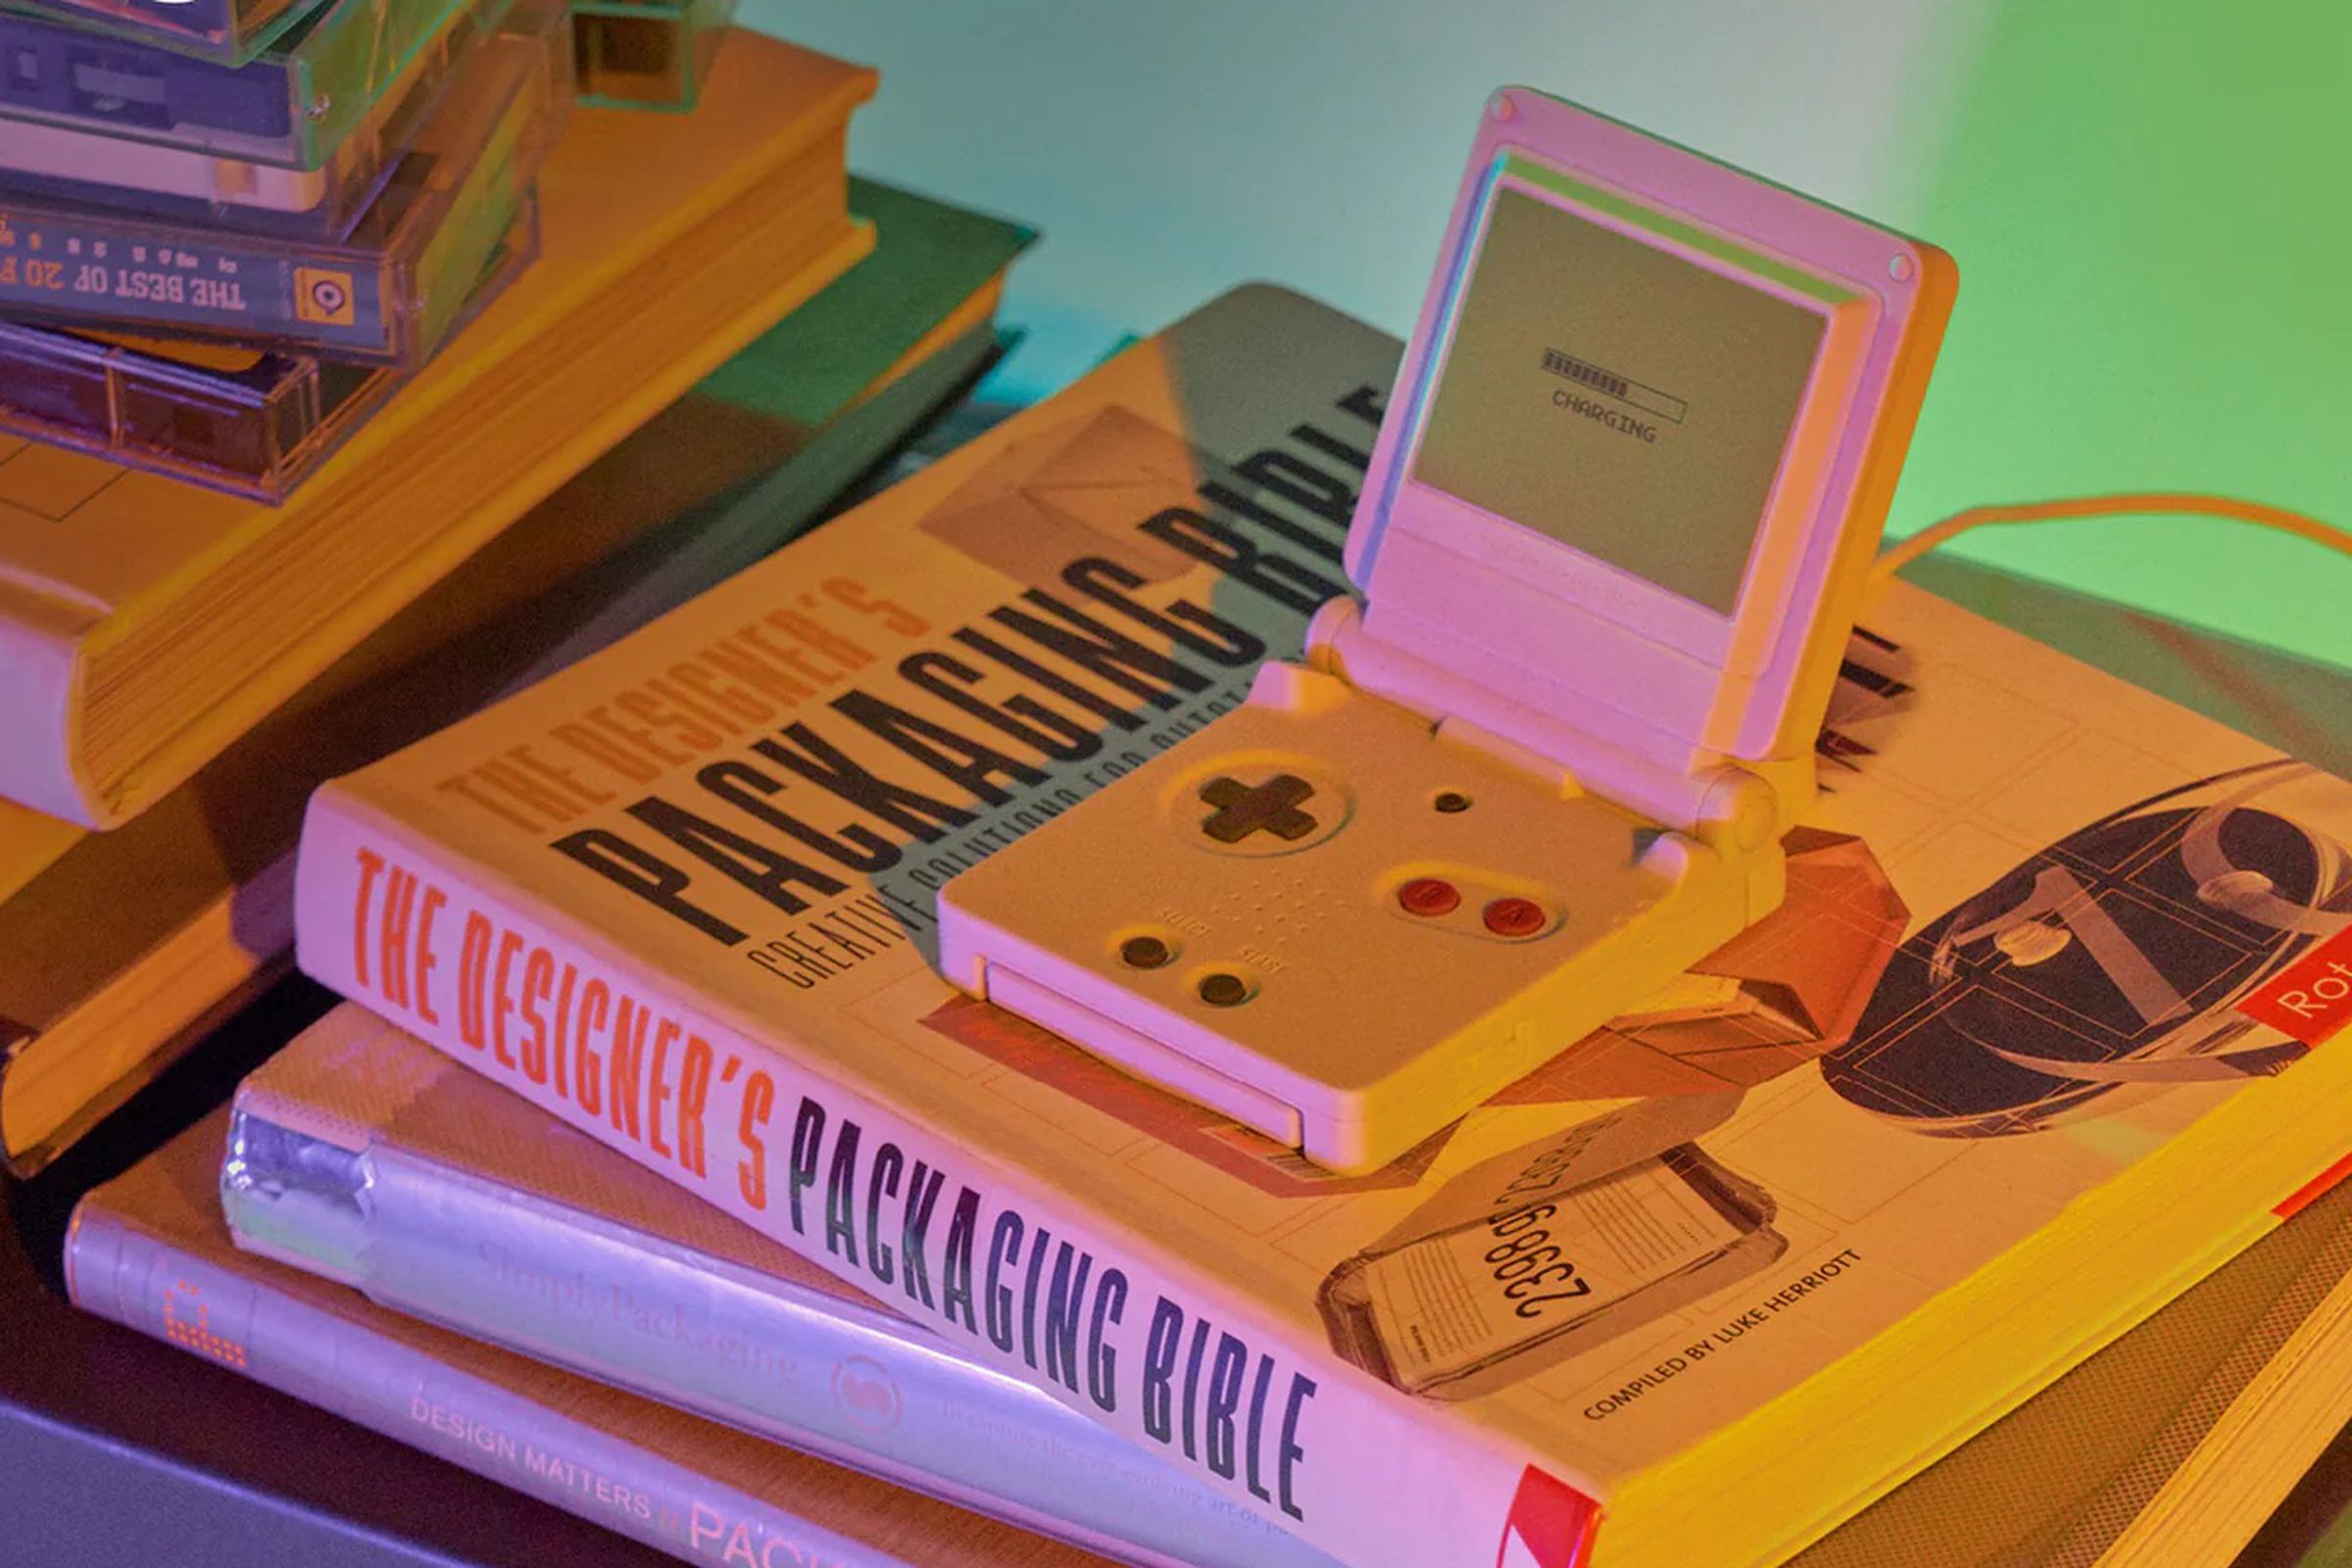 An image of a charger resembling a GameBoy SP on a stack of books.